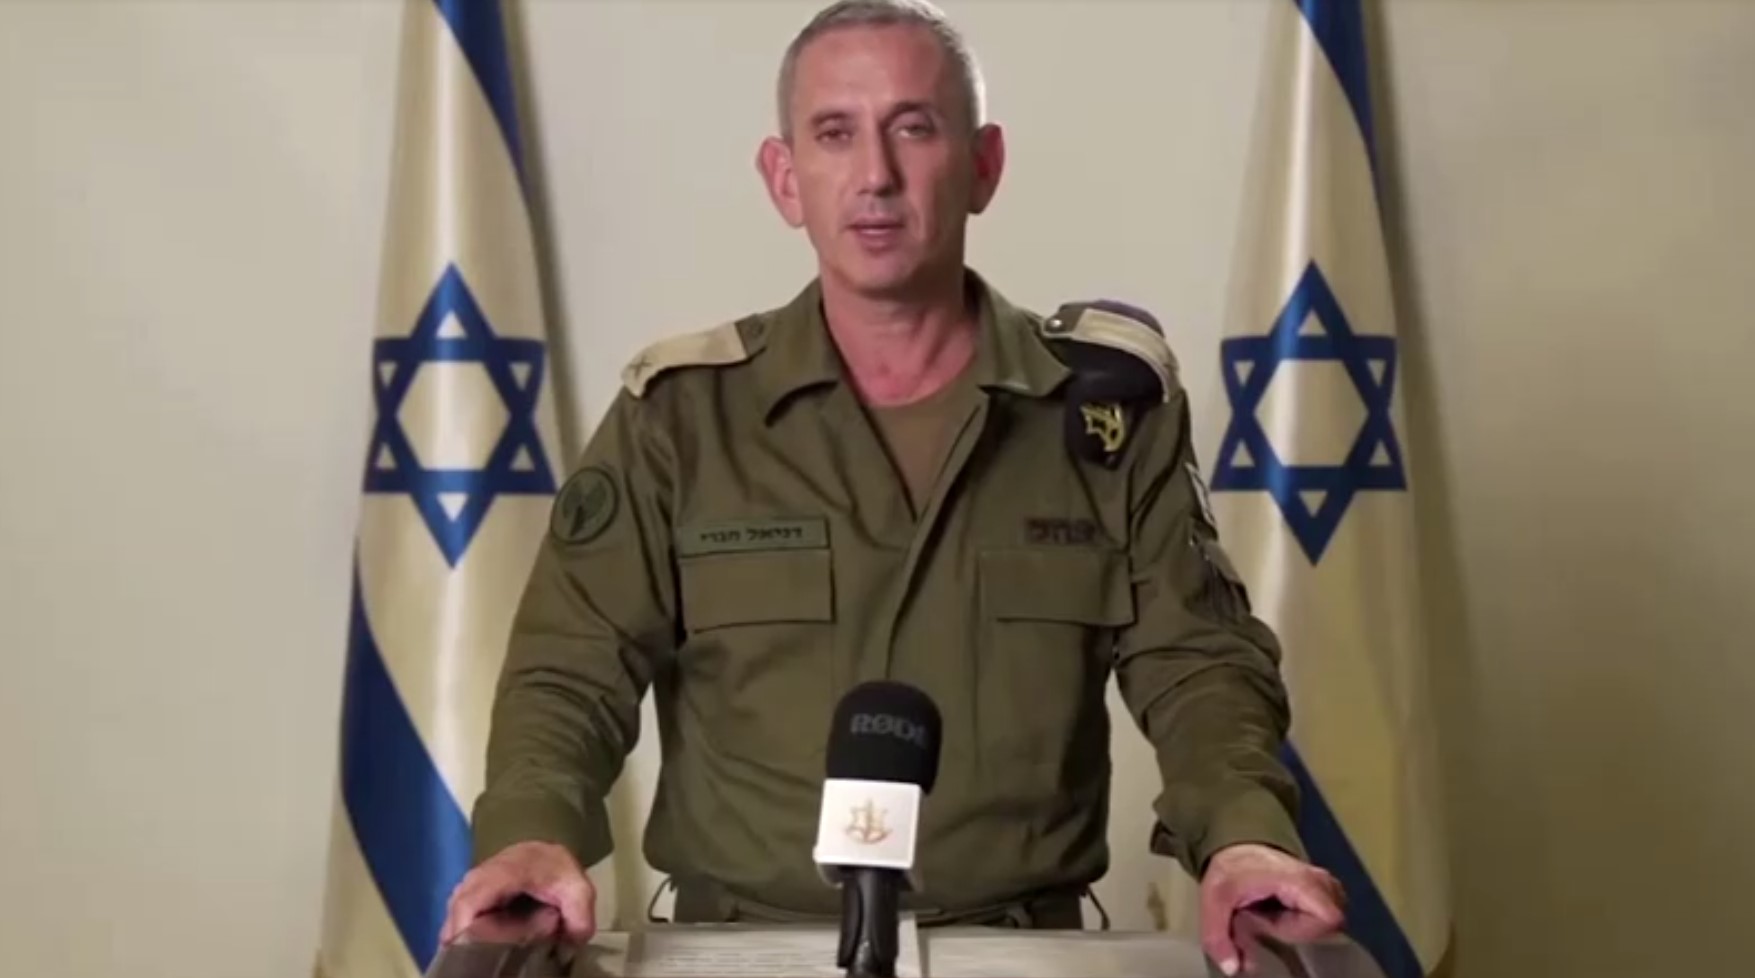 Daniel Hagari in uniform in front of two Israeli flags speaks at a microphone